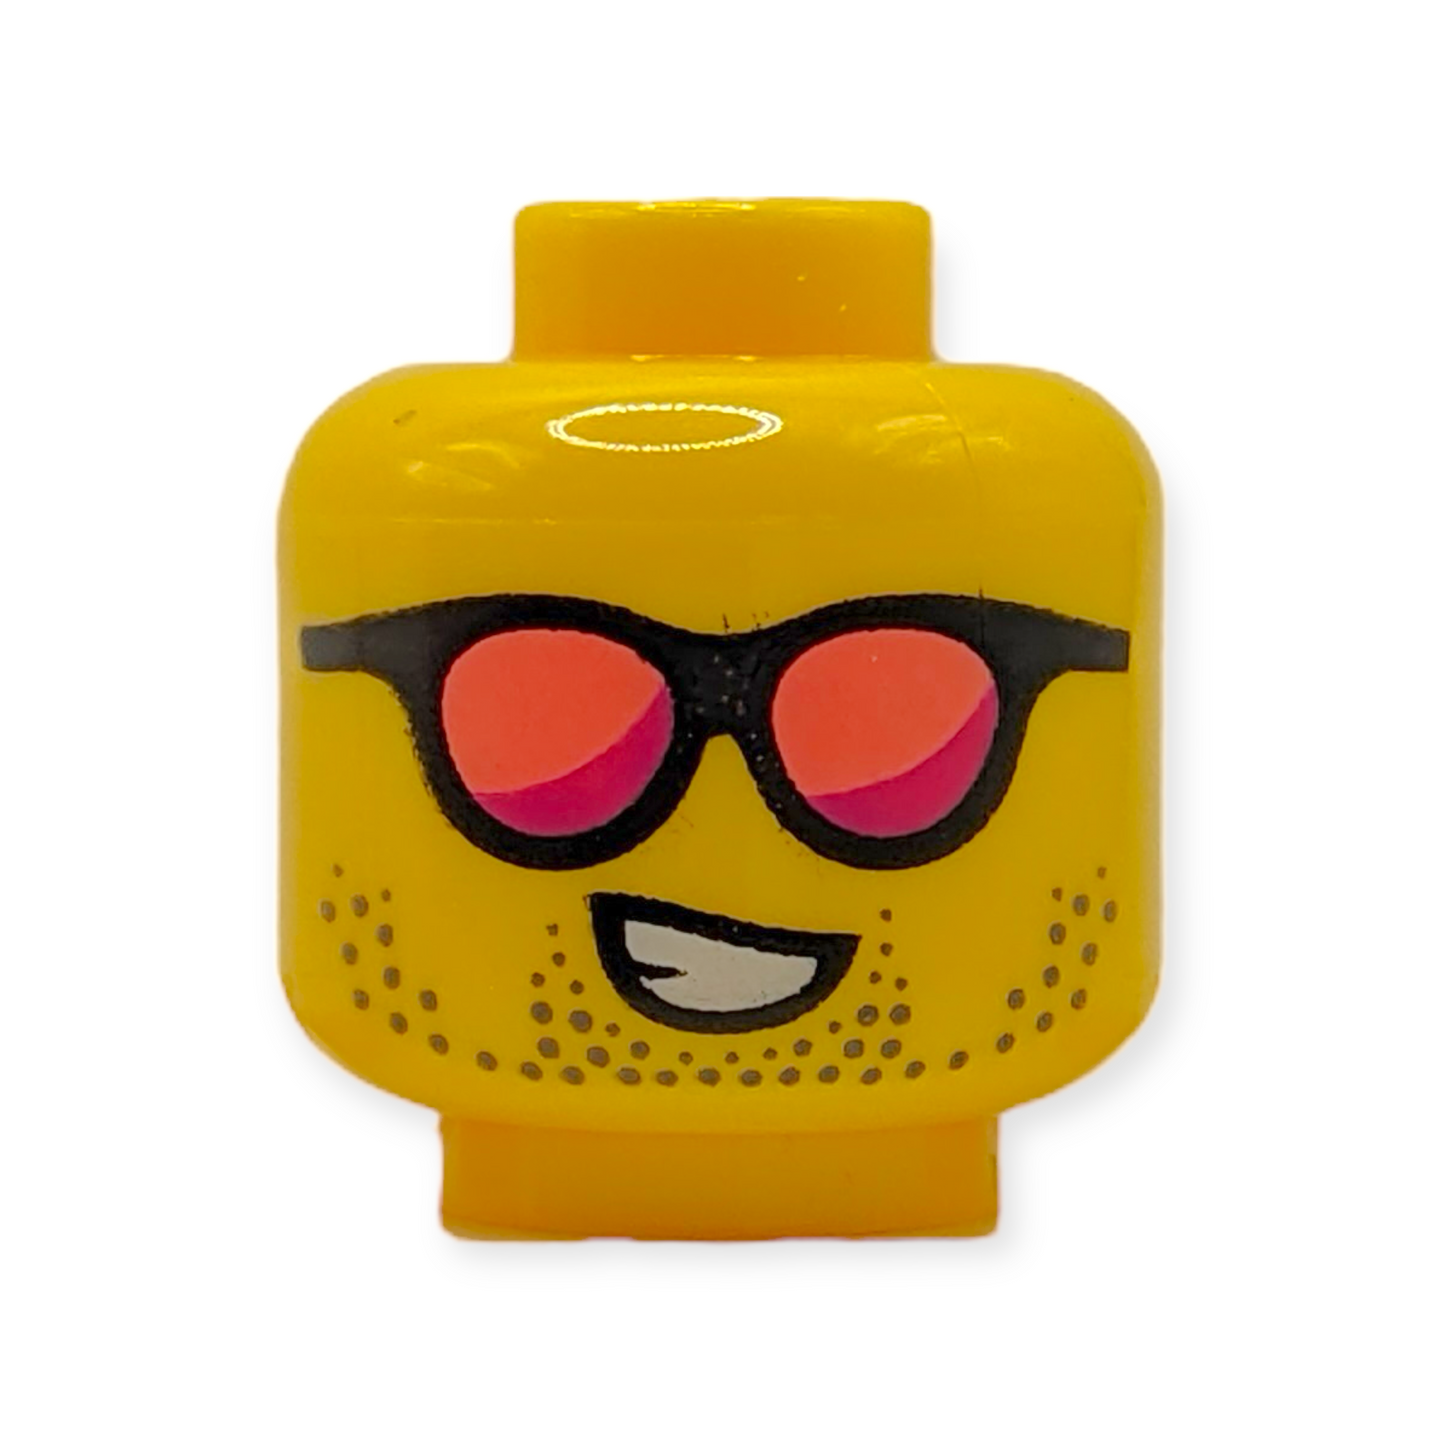 LEGO Head - 4071 Black Sunglasses with Coral and Magenta Lenses